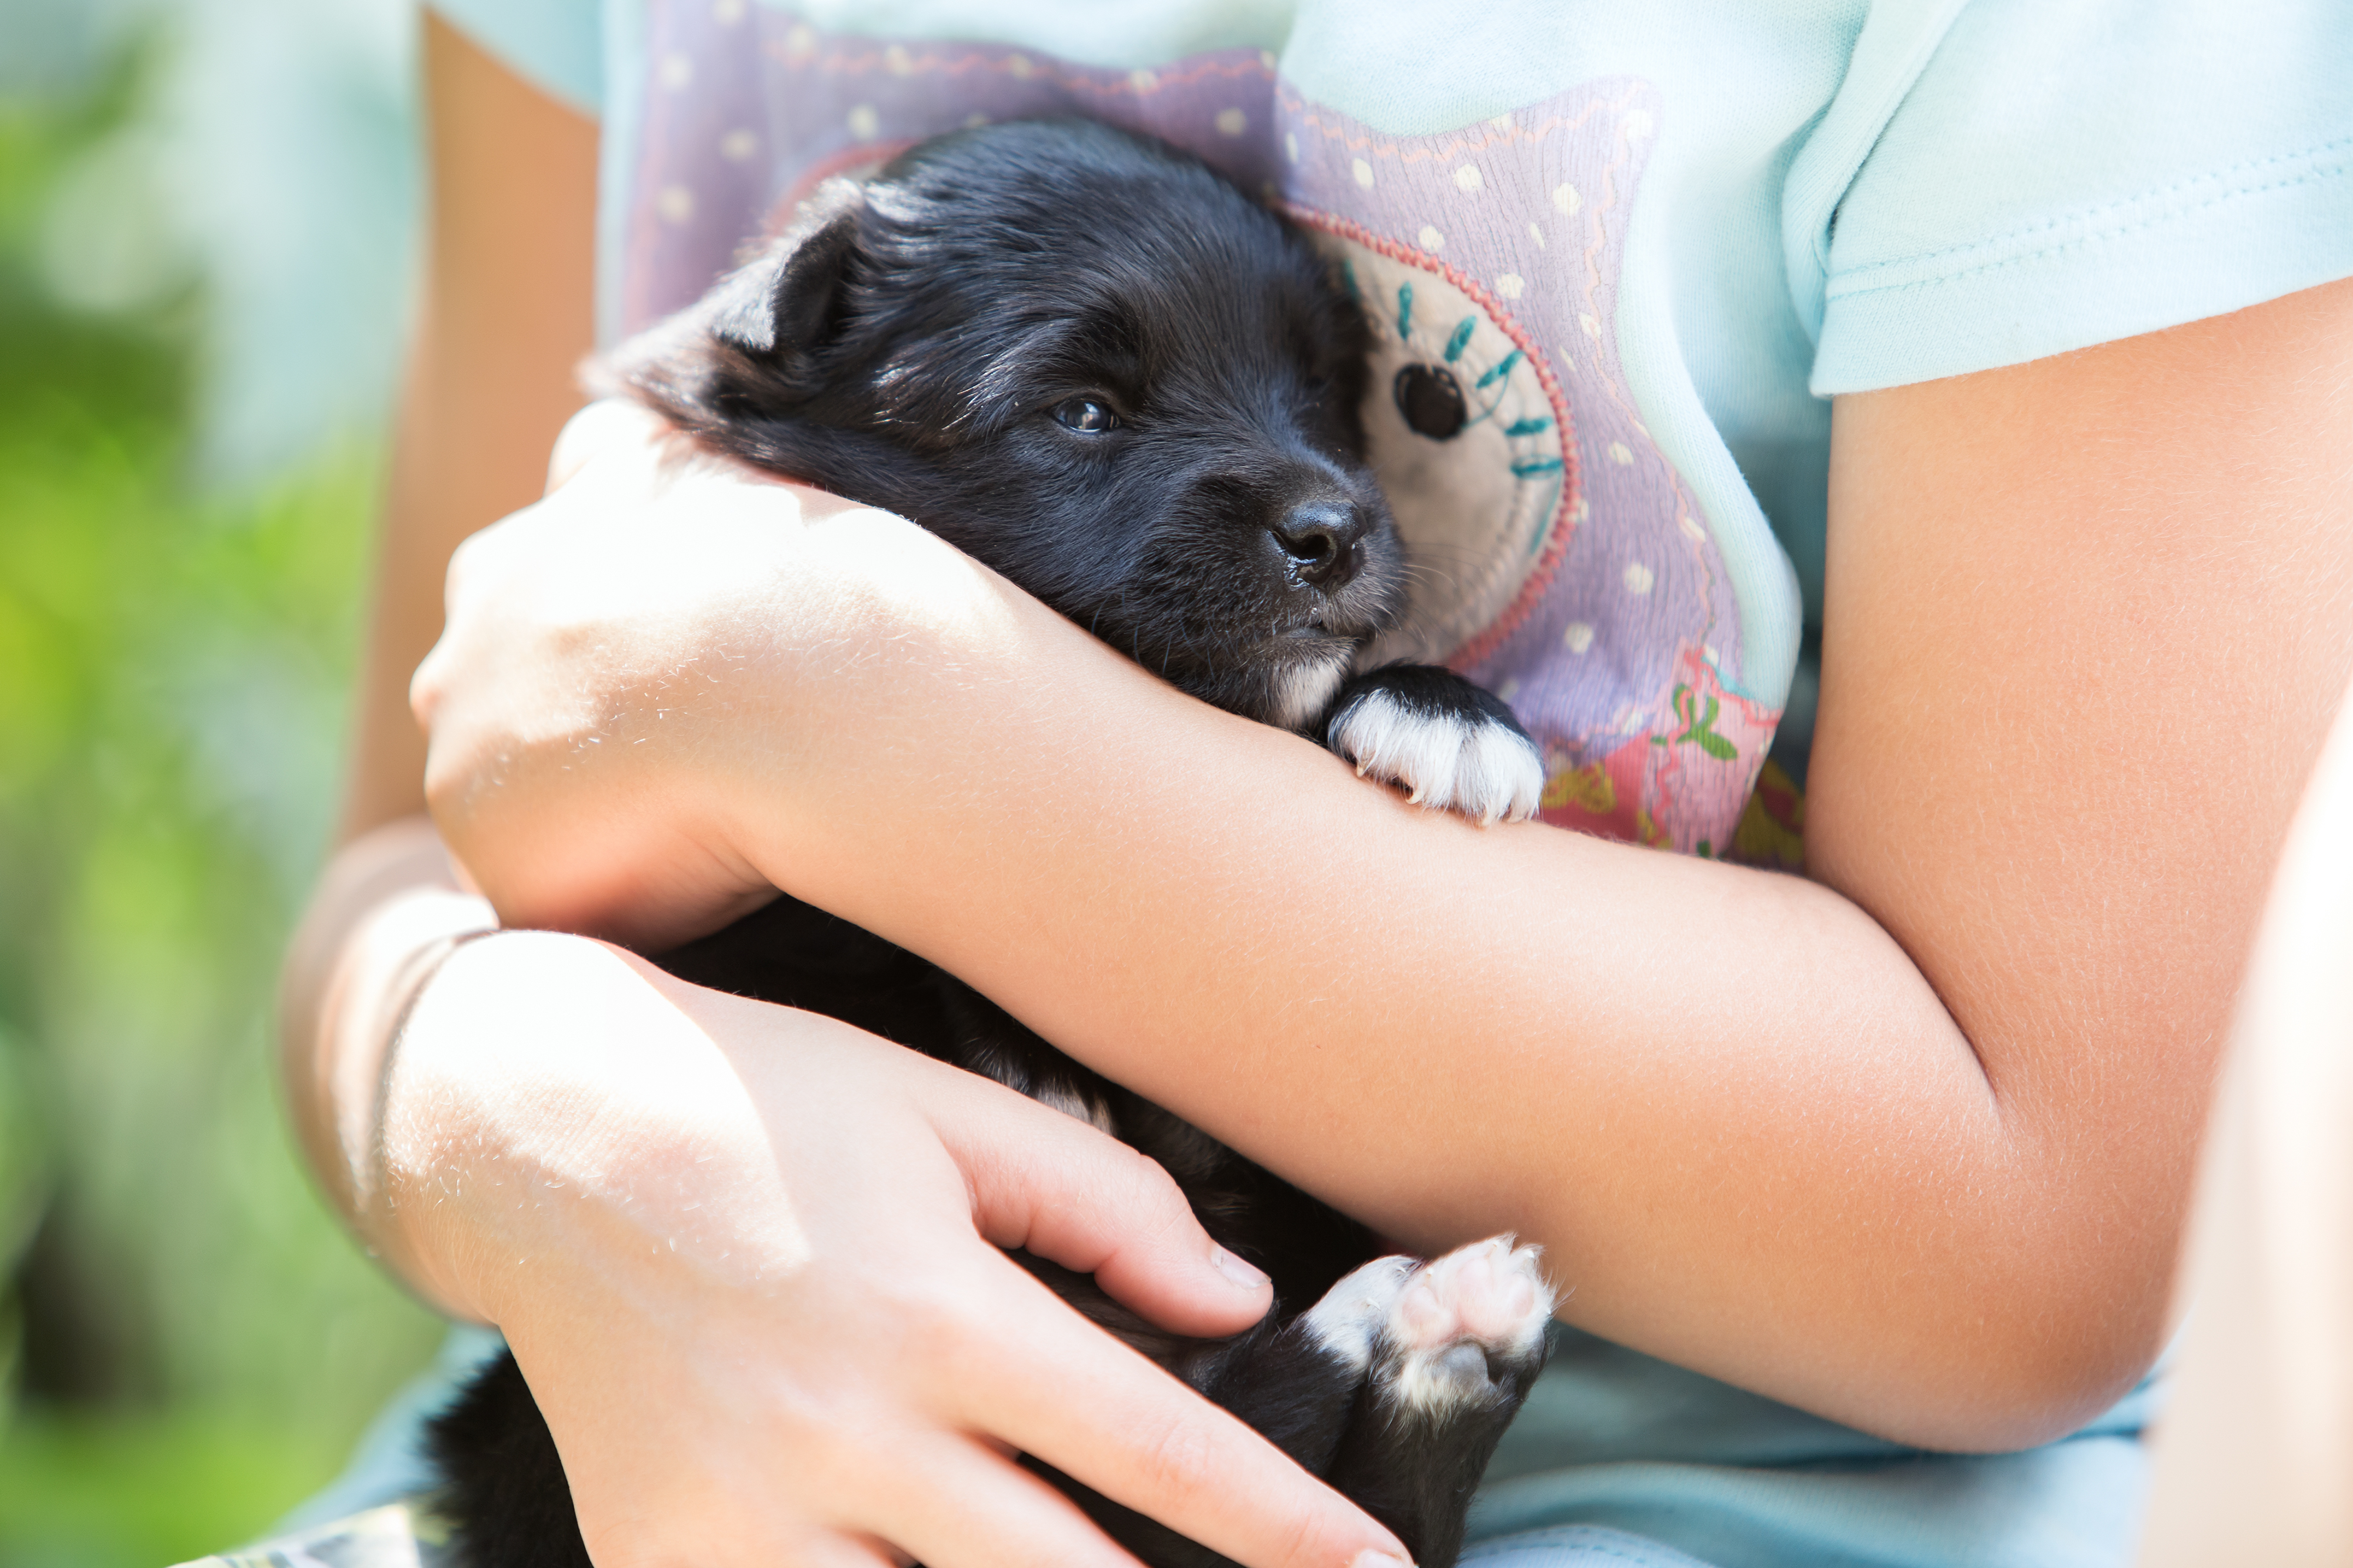 Pet Adoptions On The Rise Boosting Product Sales Supermarket News